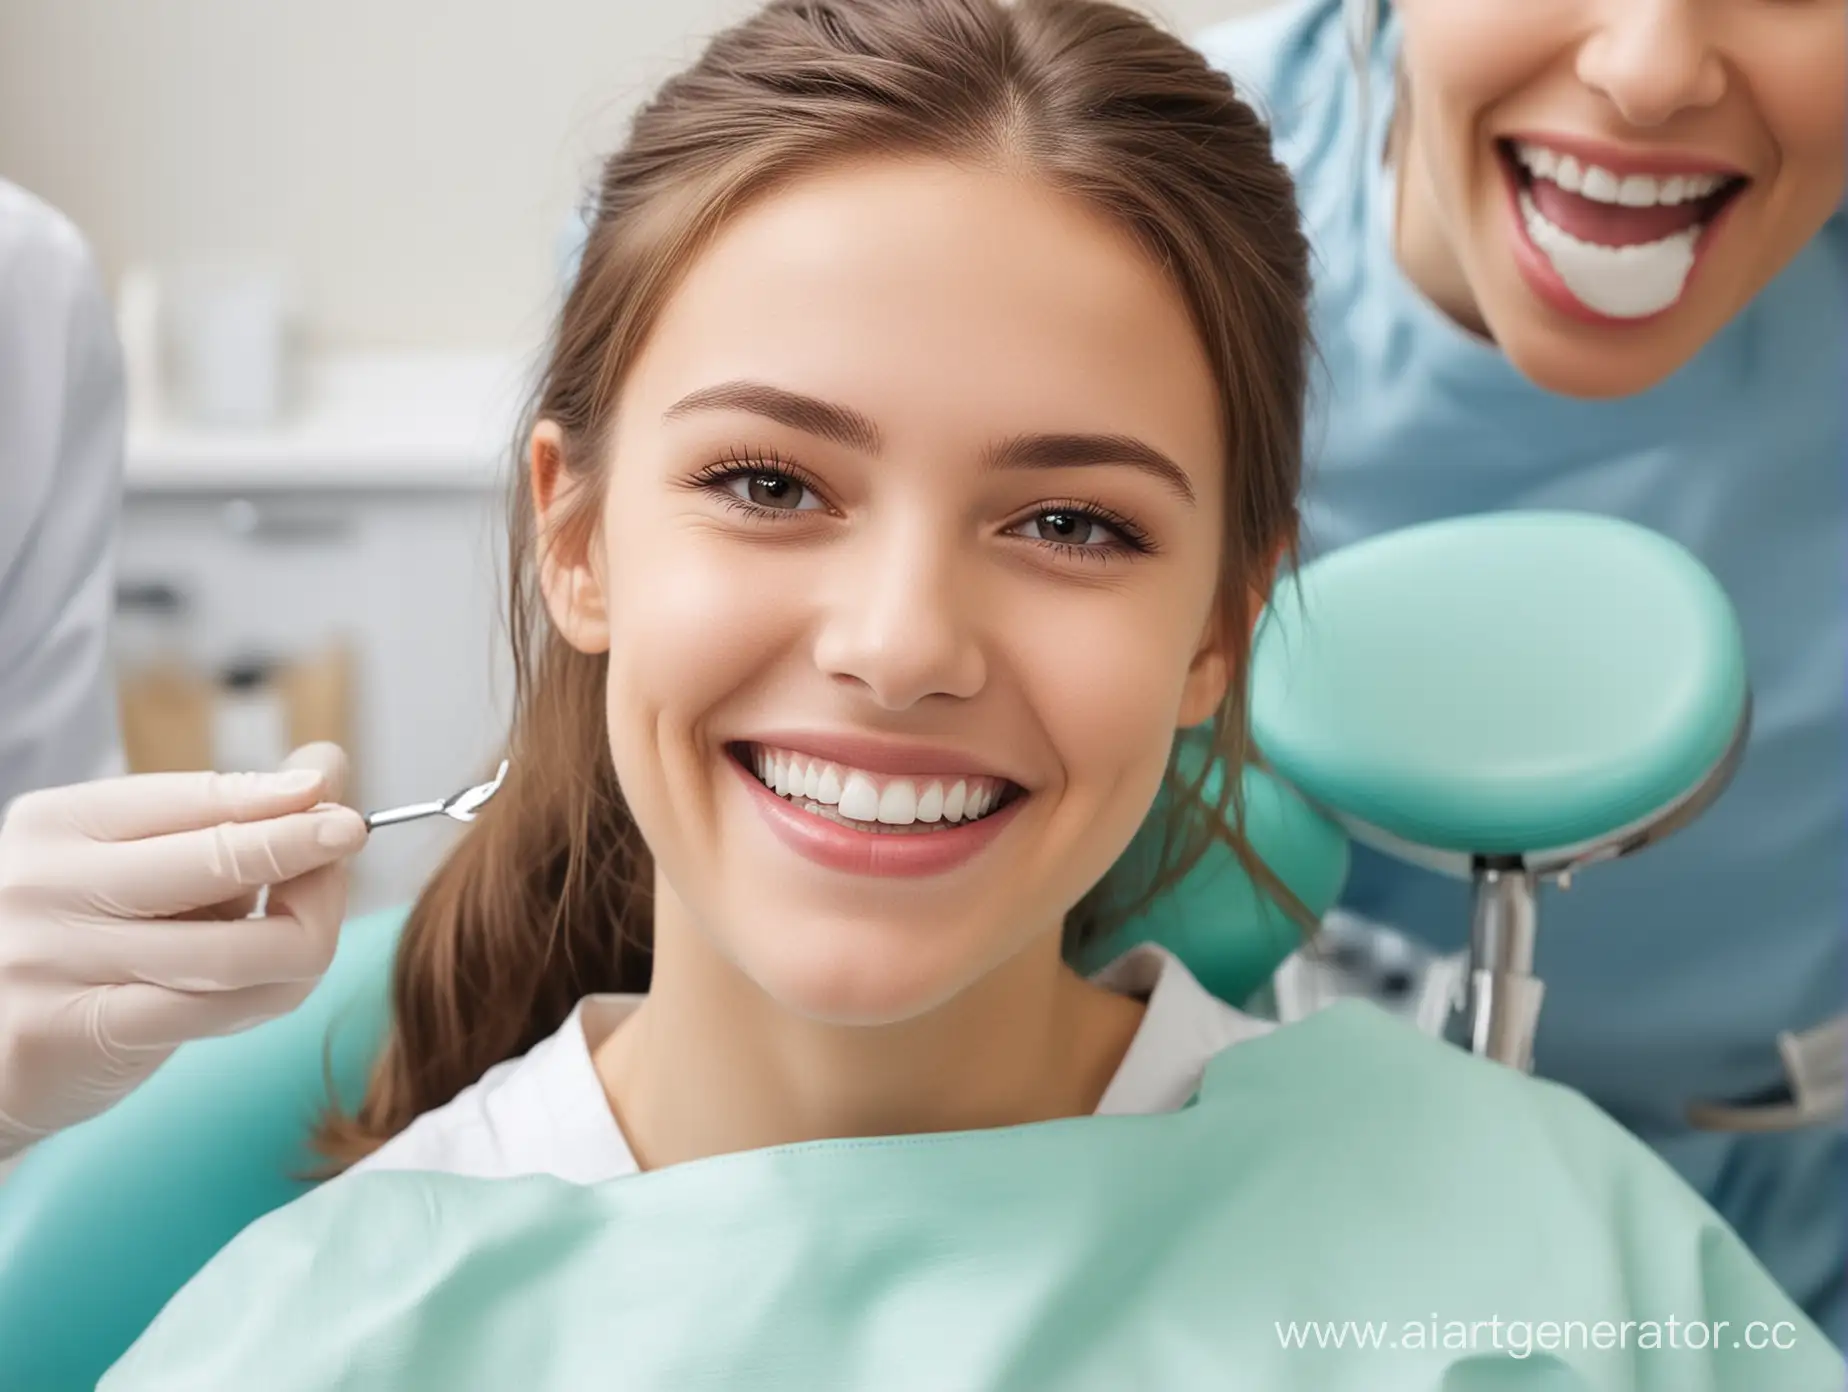 Smiling-Girl-at-Dentists-Office